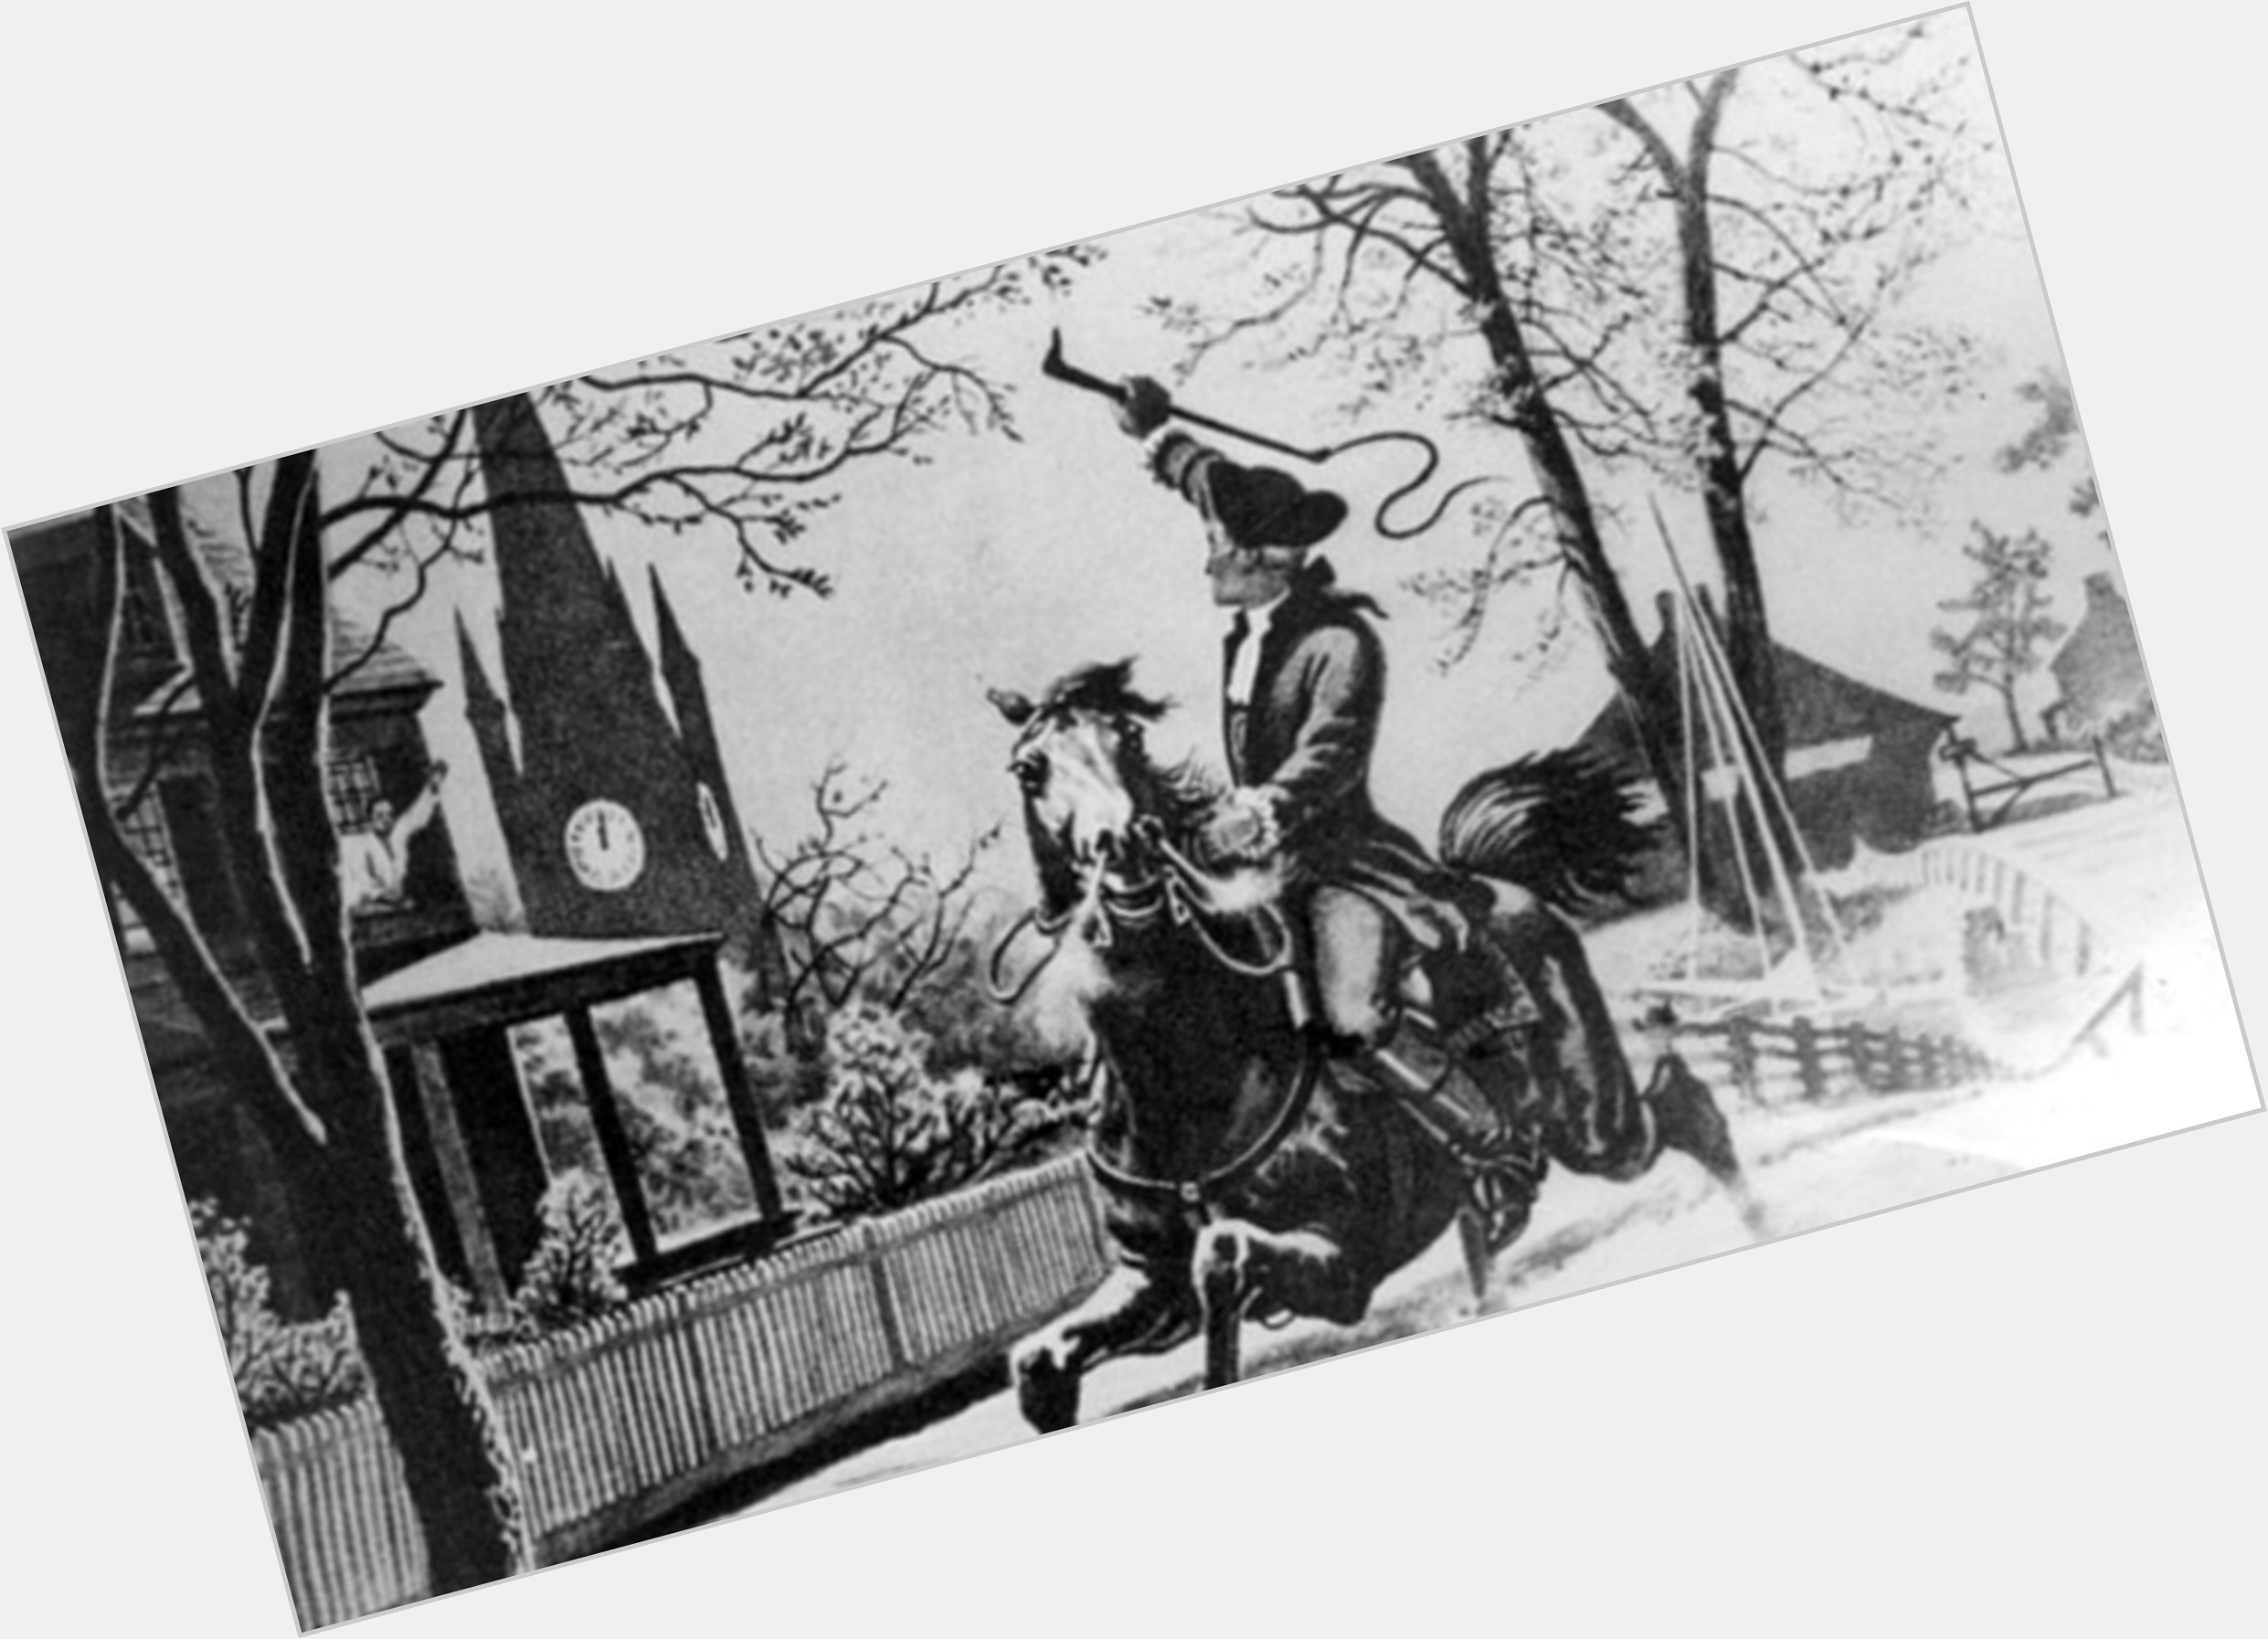 <a href="/hot-men/paul-revere/is-he-real-british-still-alive-house-haunted">Paul Revere</a>  